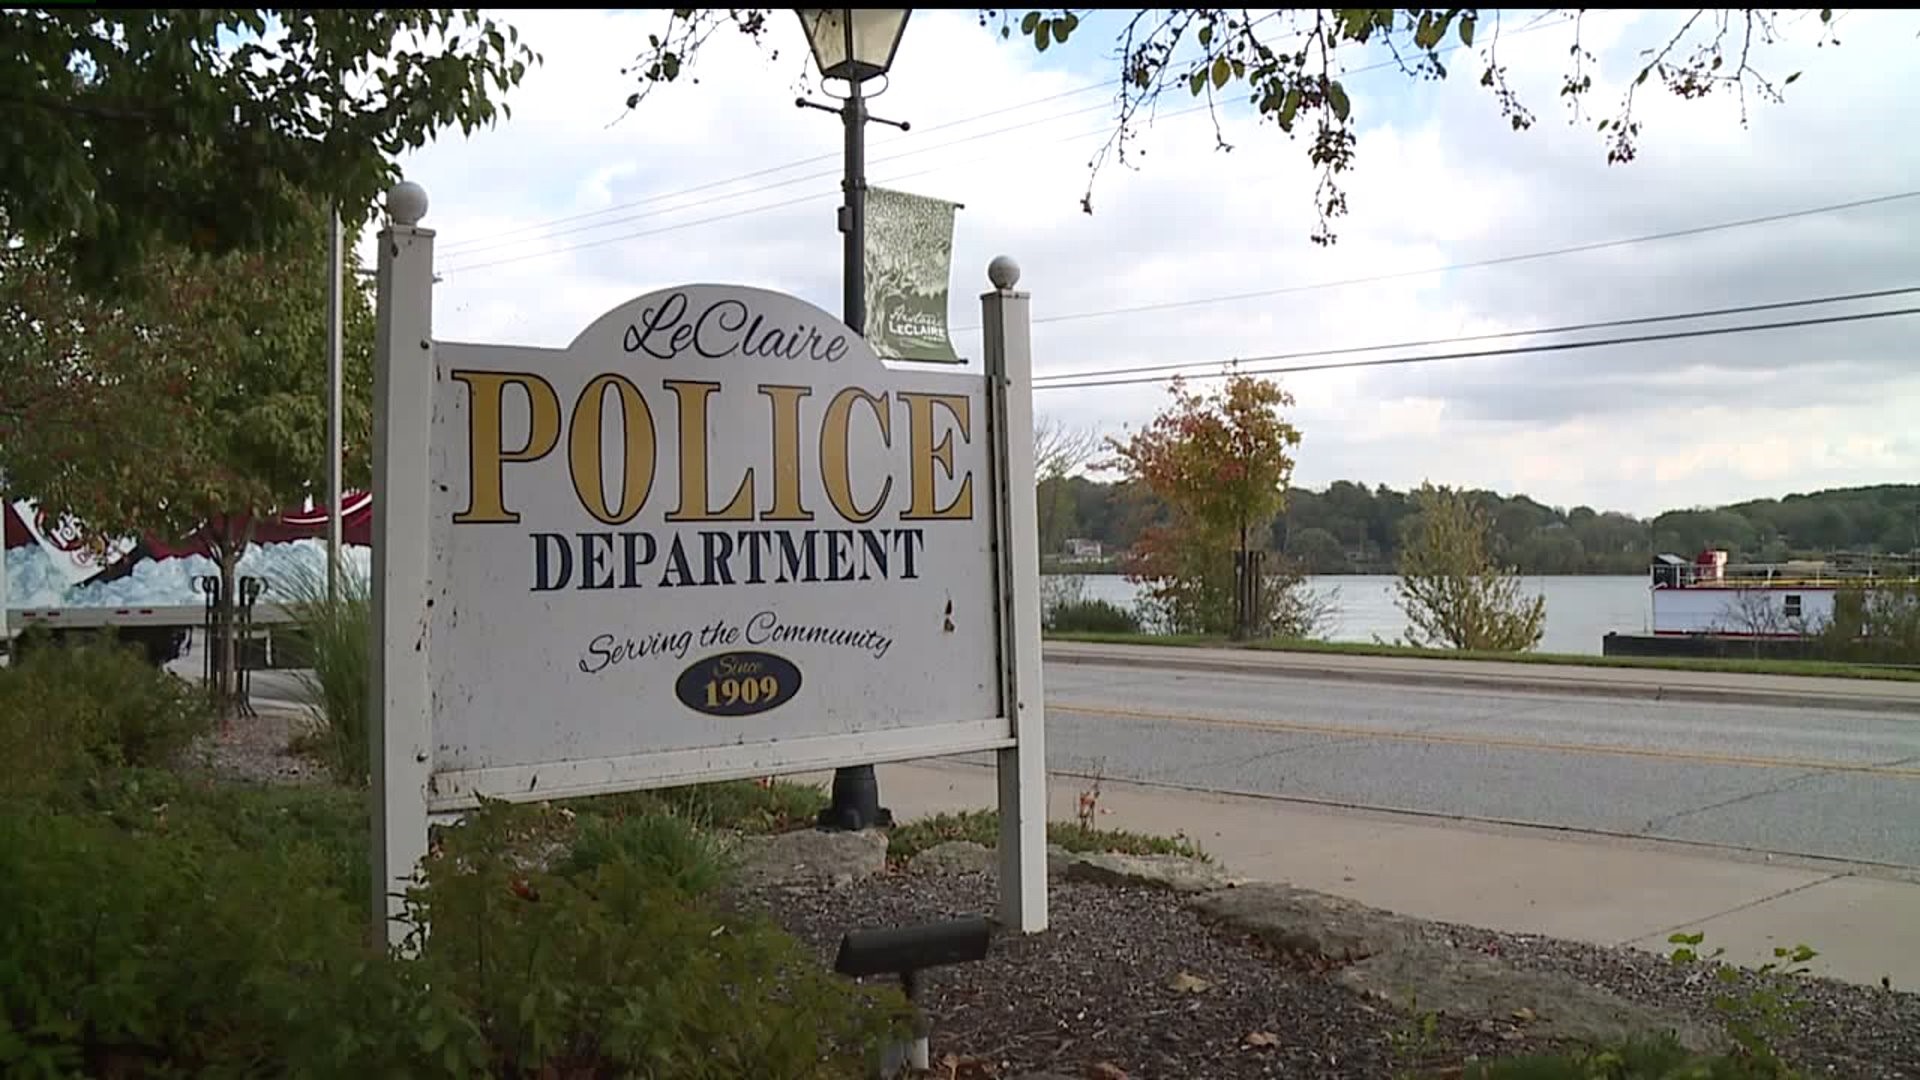 LeClaire Police Department to undergo renovation